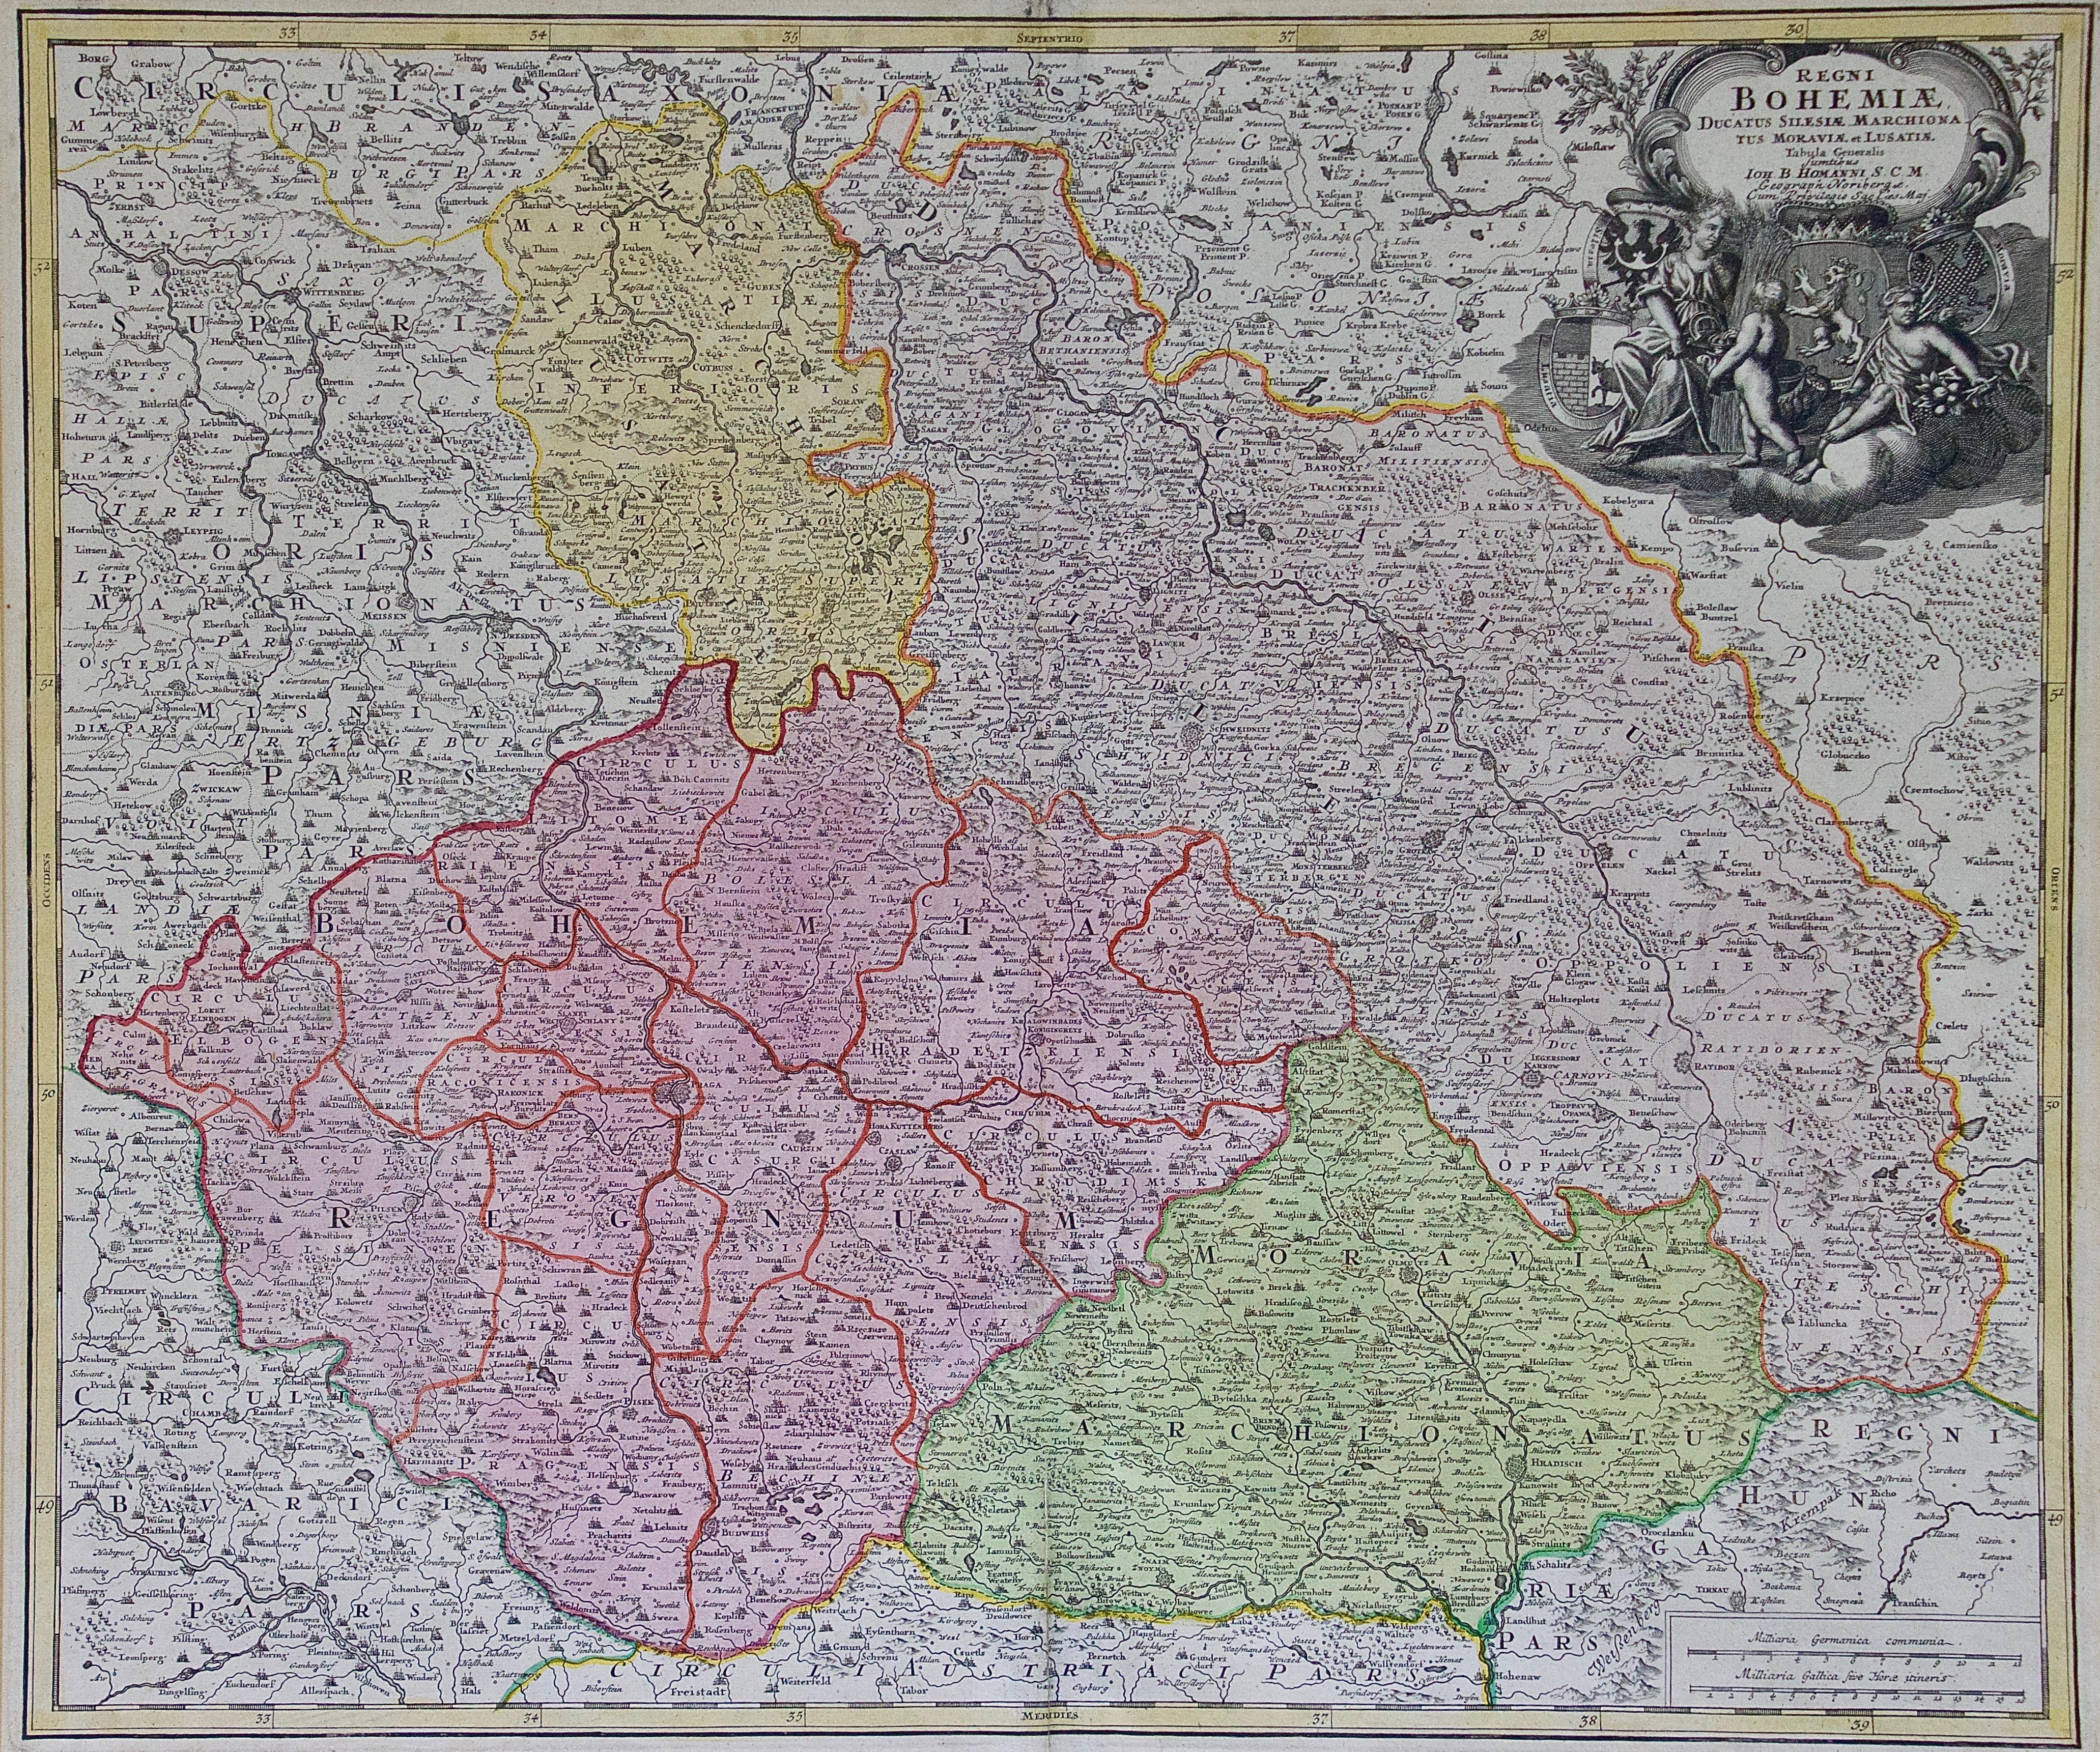 This is a hand-colored early 18th century map entitled 